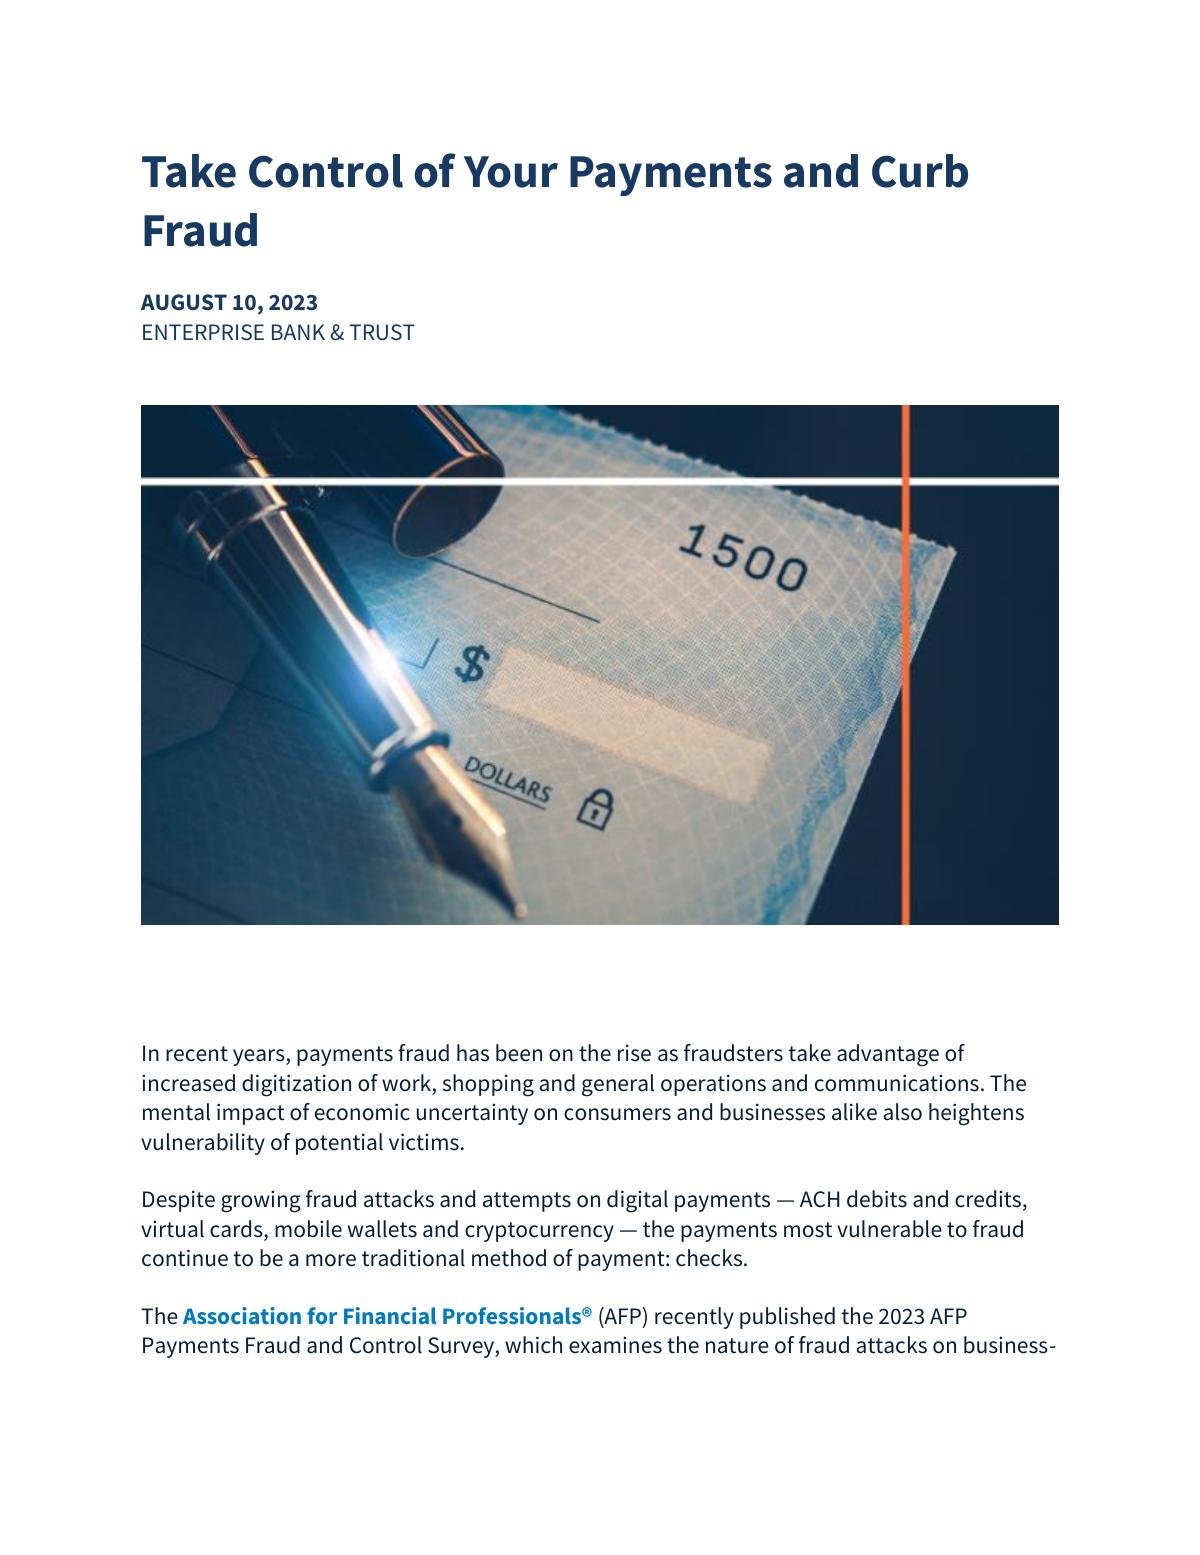 Take Control of Your Payments and Curb Fraud